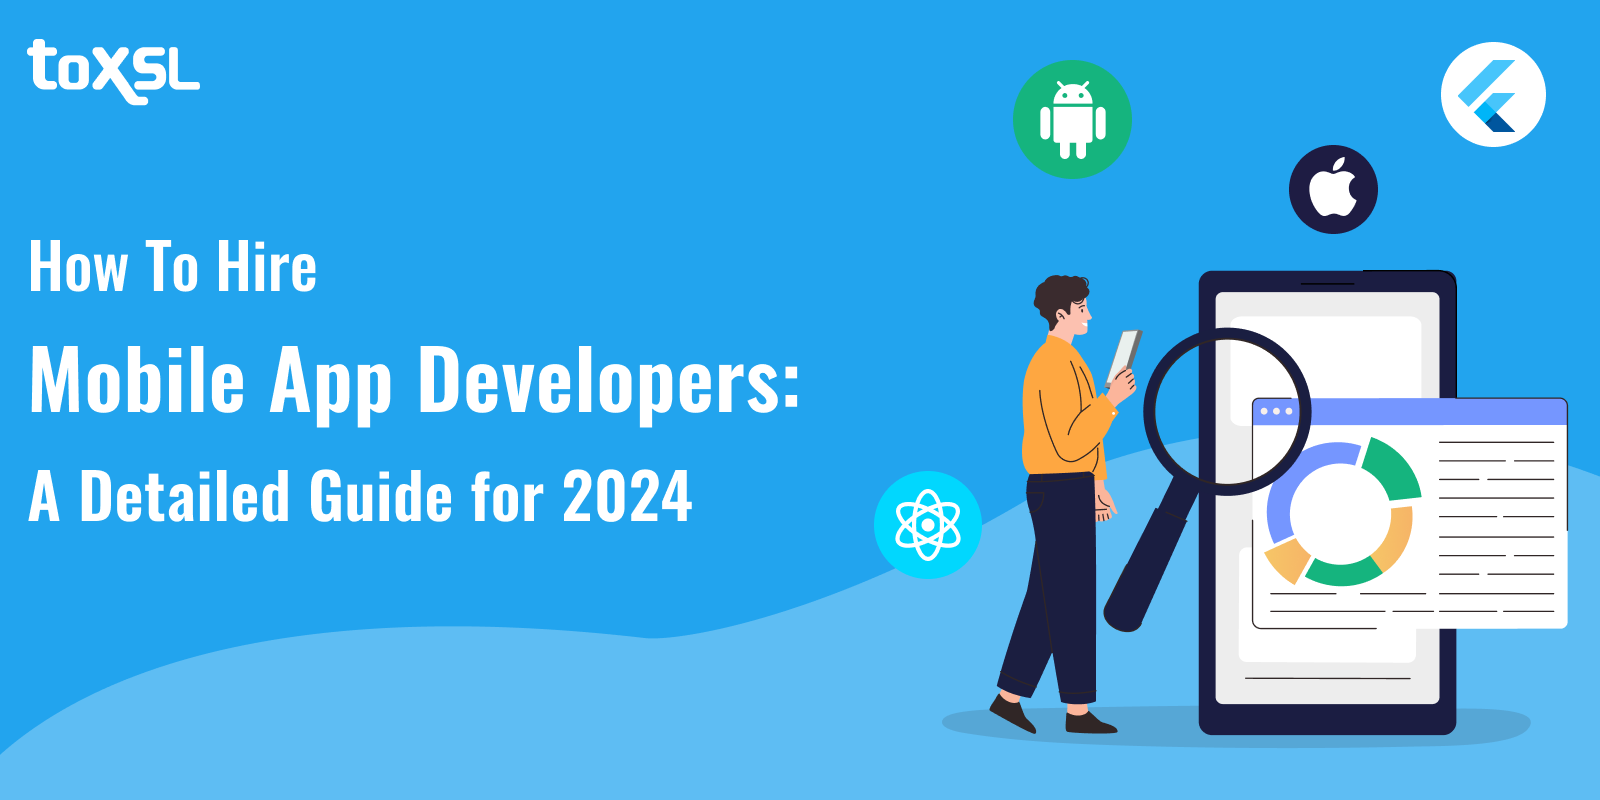 How To Hire Mobile App Developers: A Detailed Guide for 2024